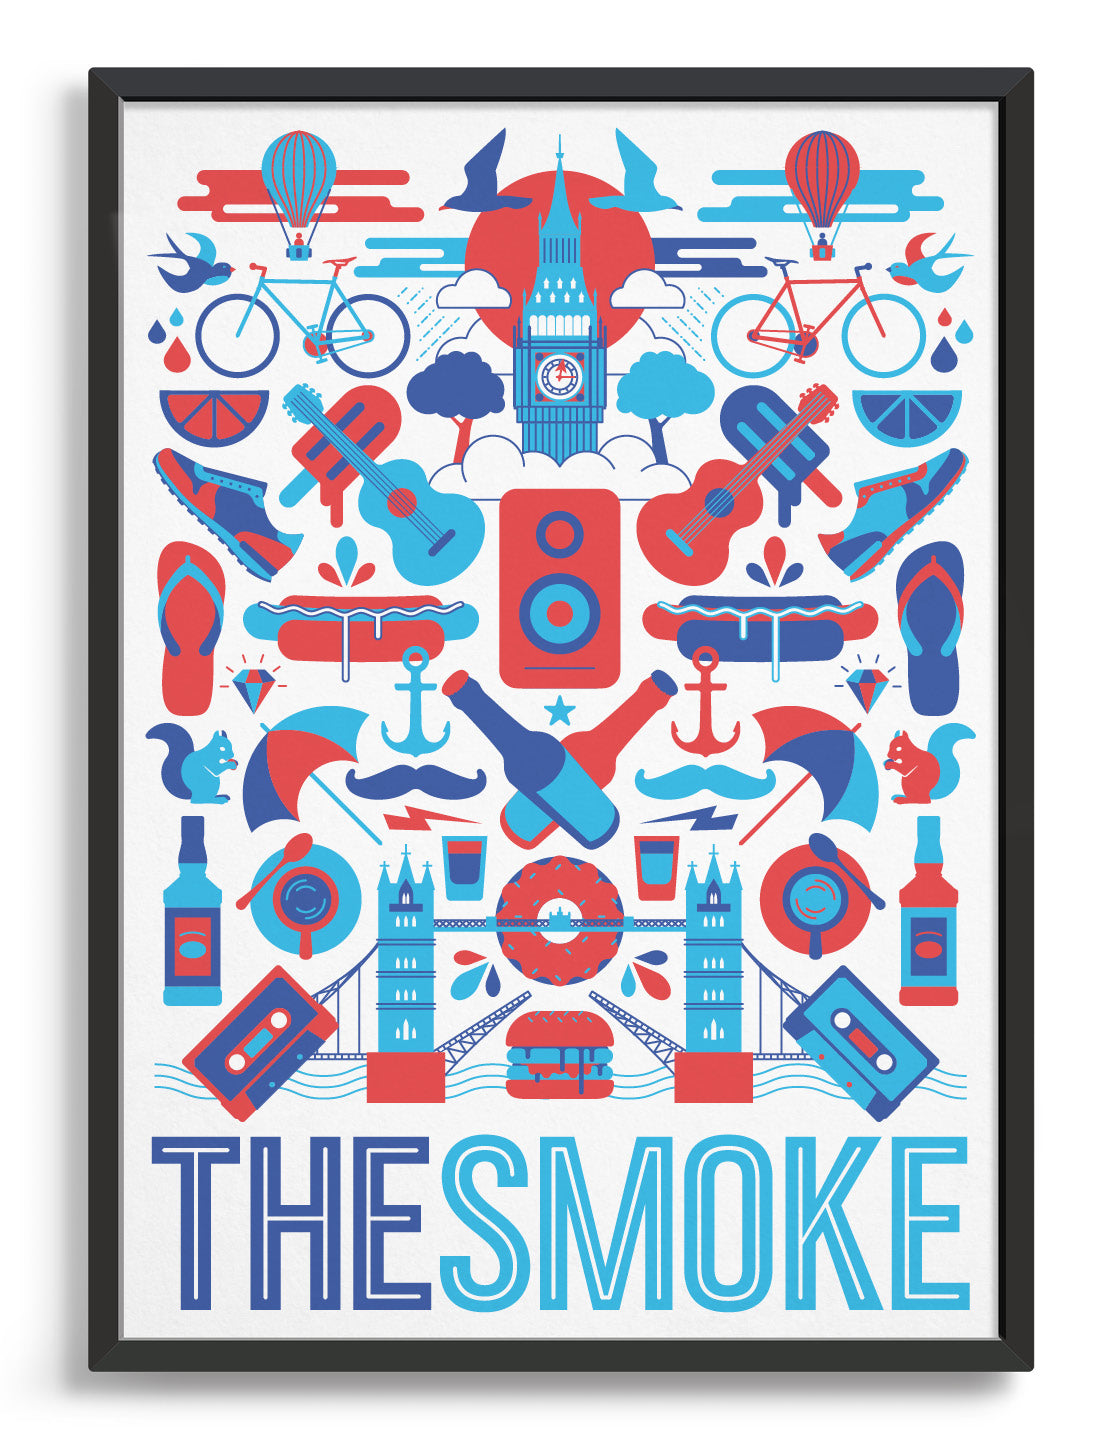 framed 'The Smoke' souvenir art print of London iconography including Big Ben and Tower Bridge